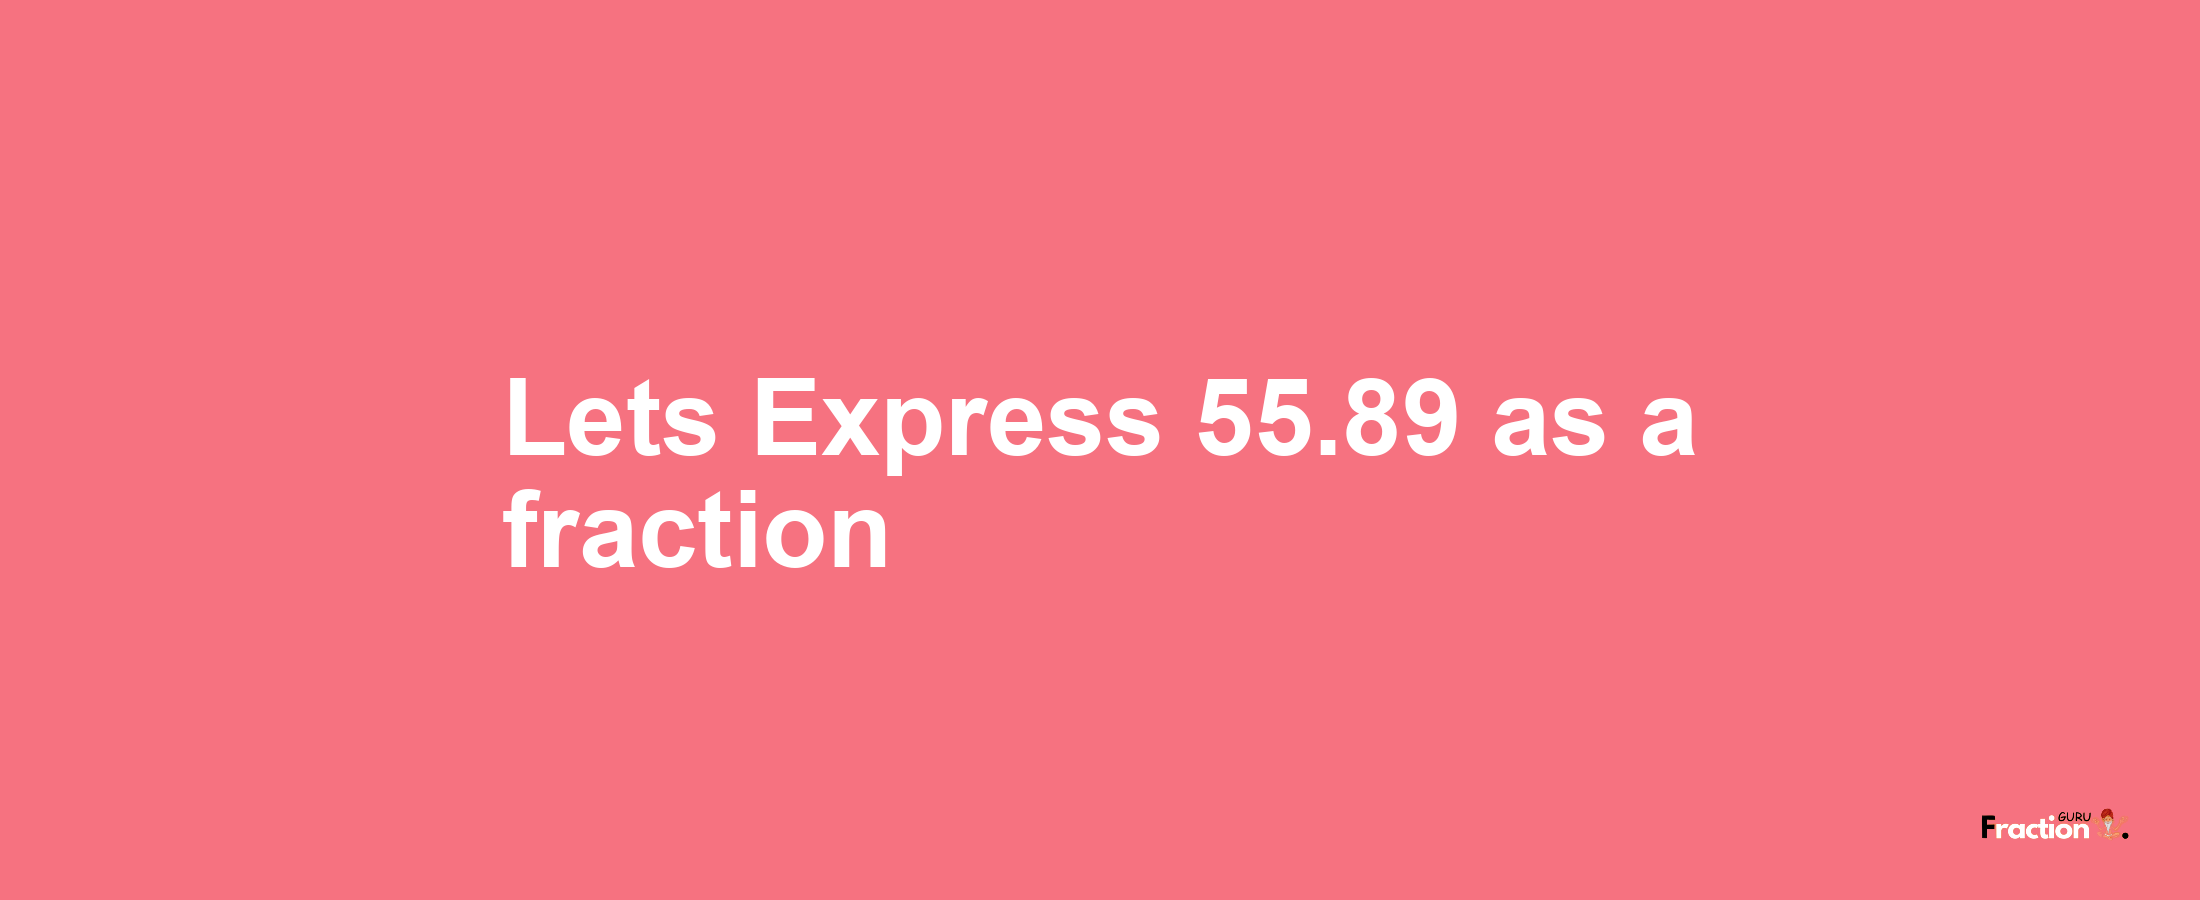 Lets Express 55.89 as afraction